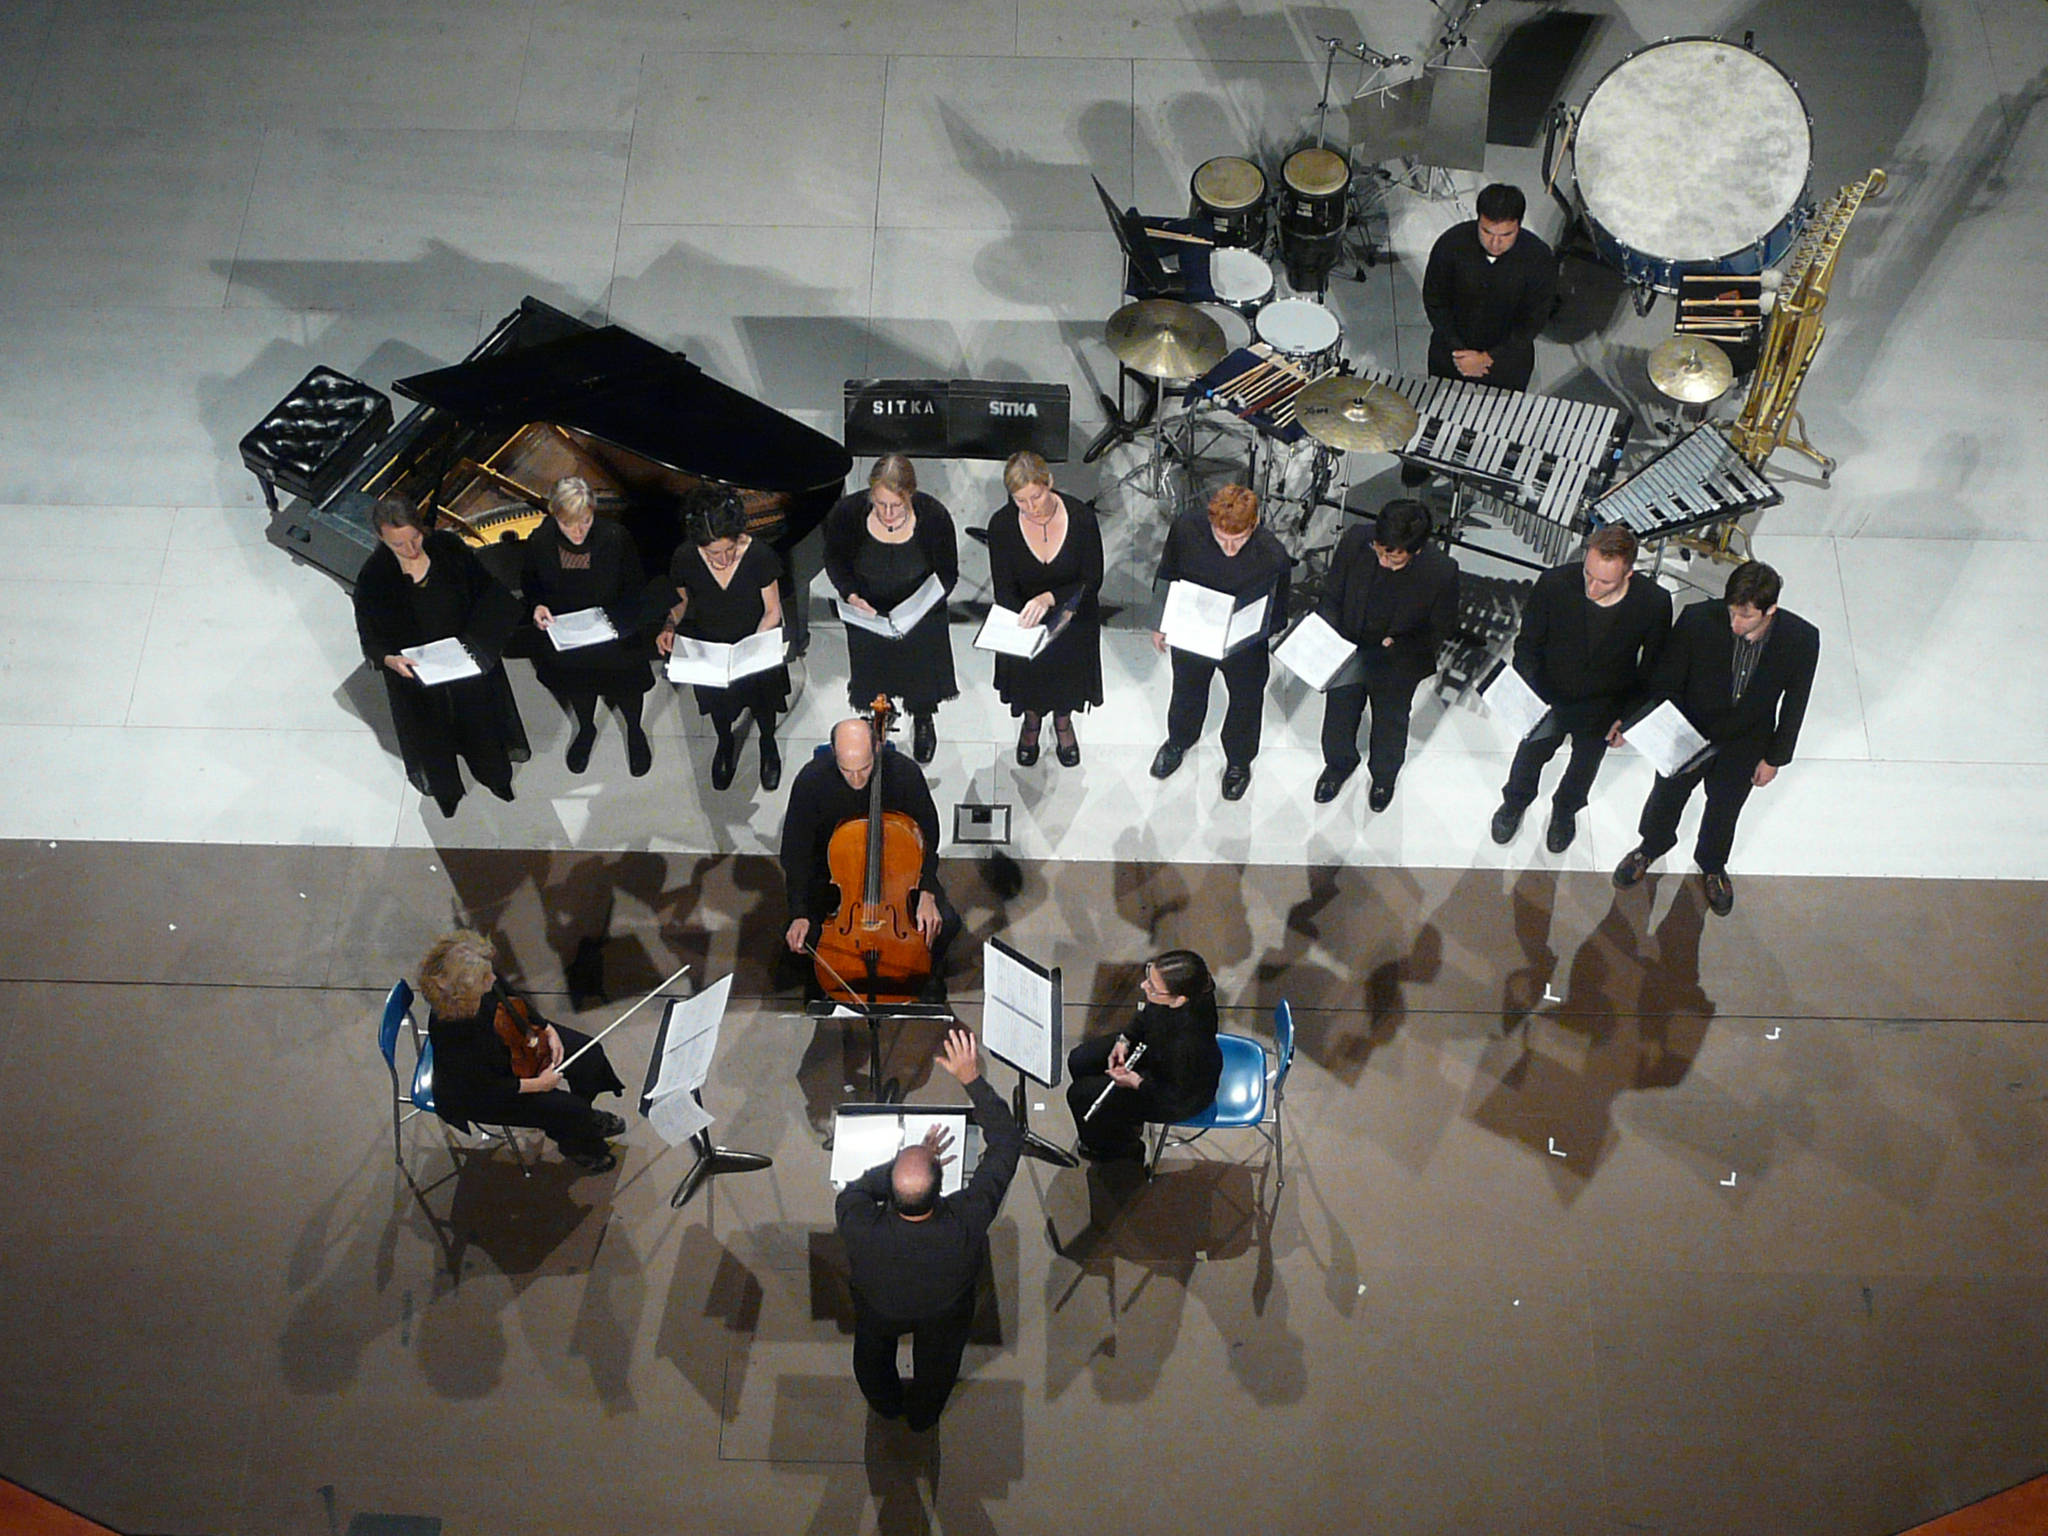 Ed Littlefield, with percussion instruments at top right, performs in Sitka. Courtesy image.